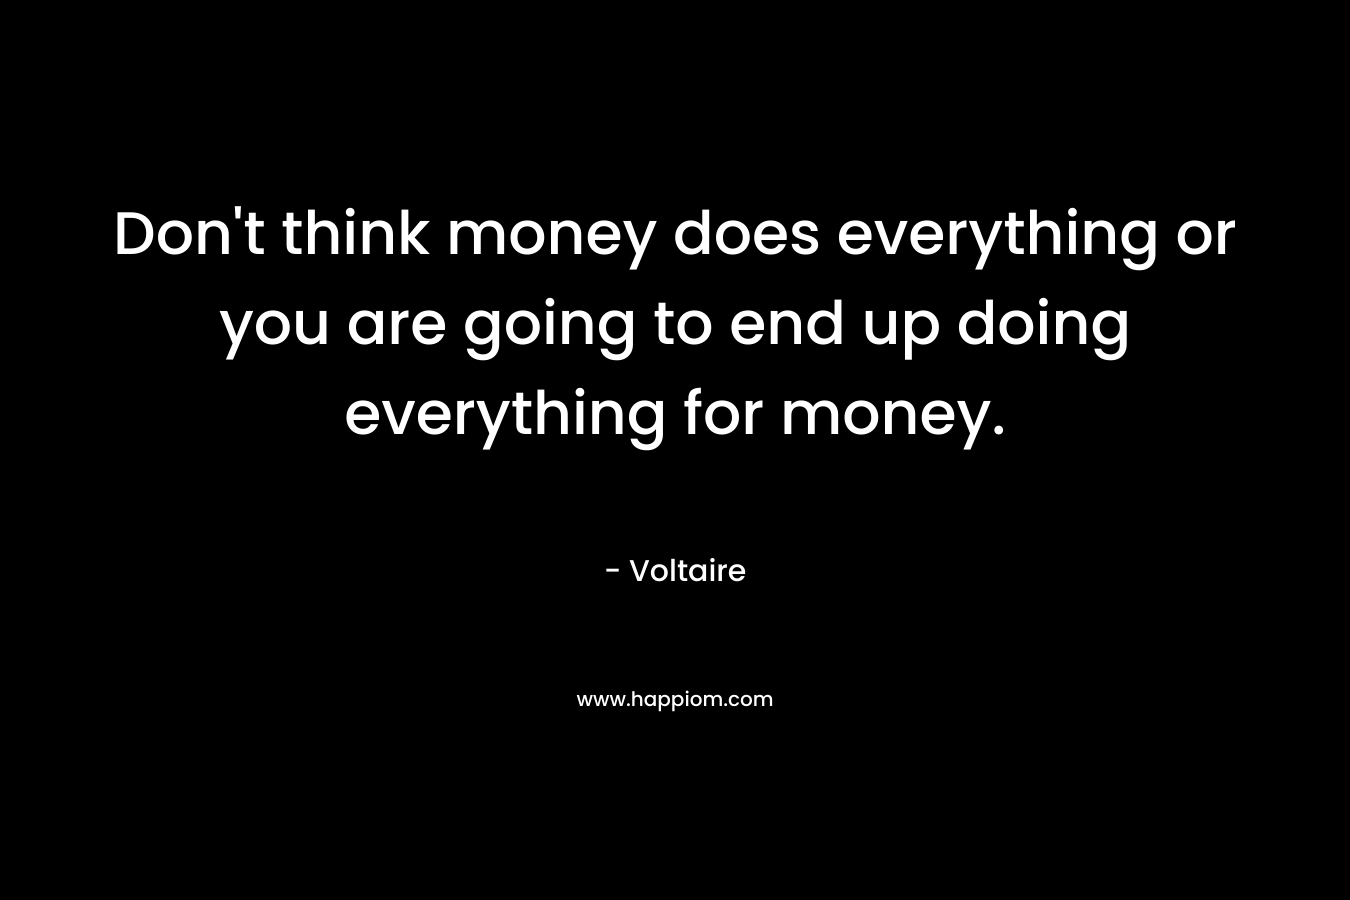 Don't think money does everything or you are going to end up doing everything for money.